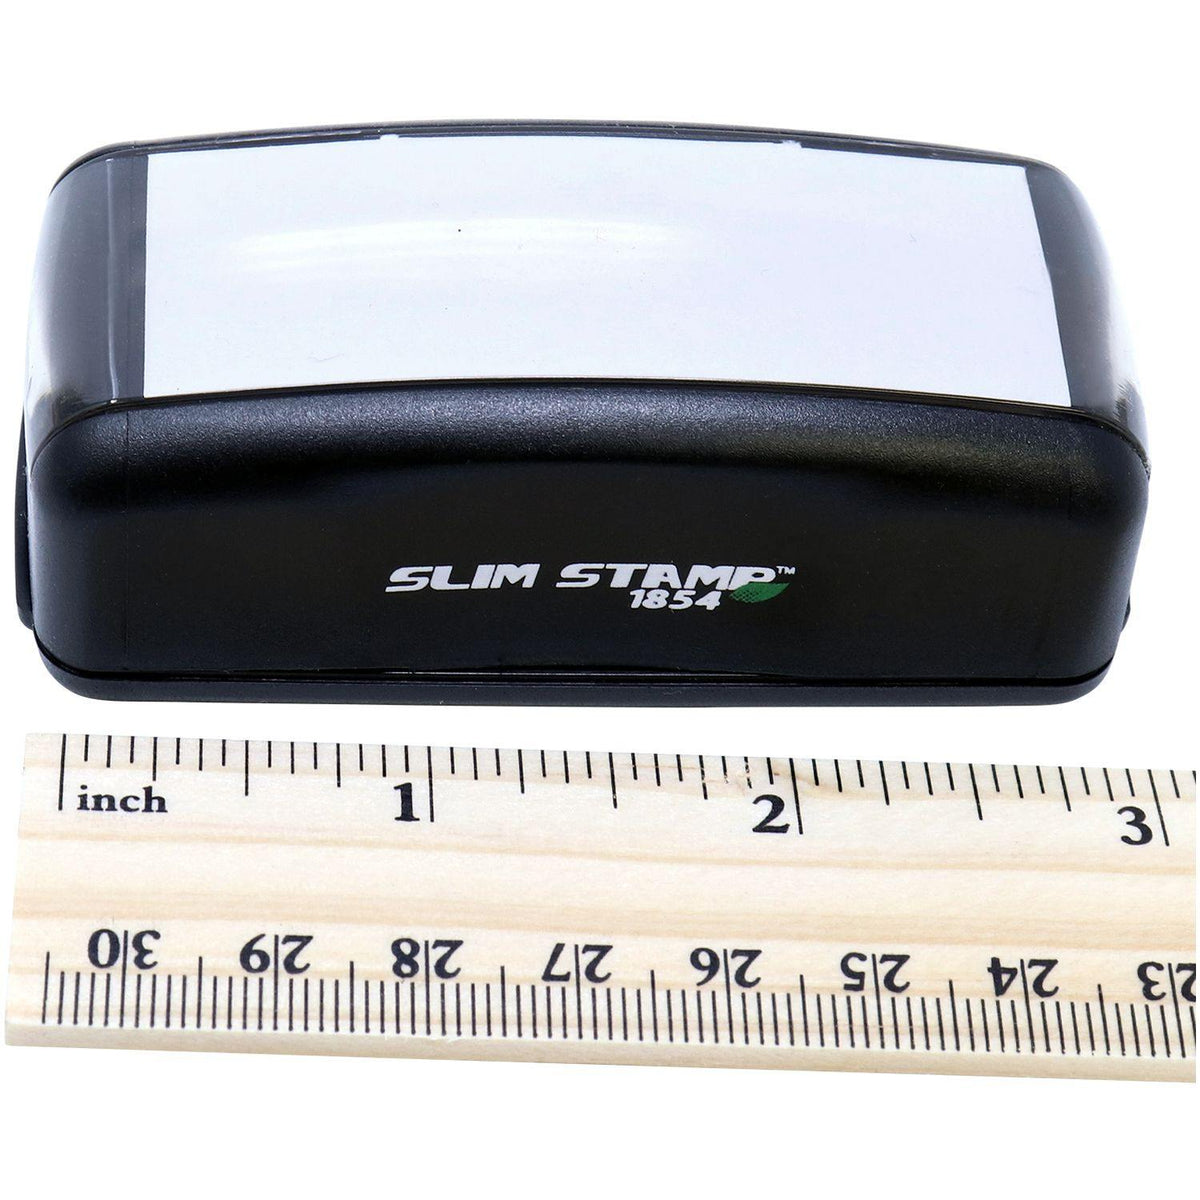 Measurement Large Pre Inked Smoker Stamp with Ruler